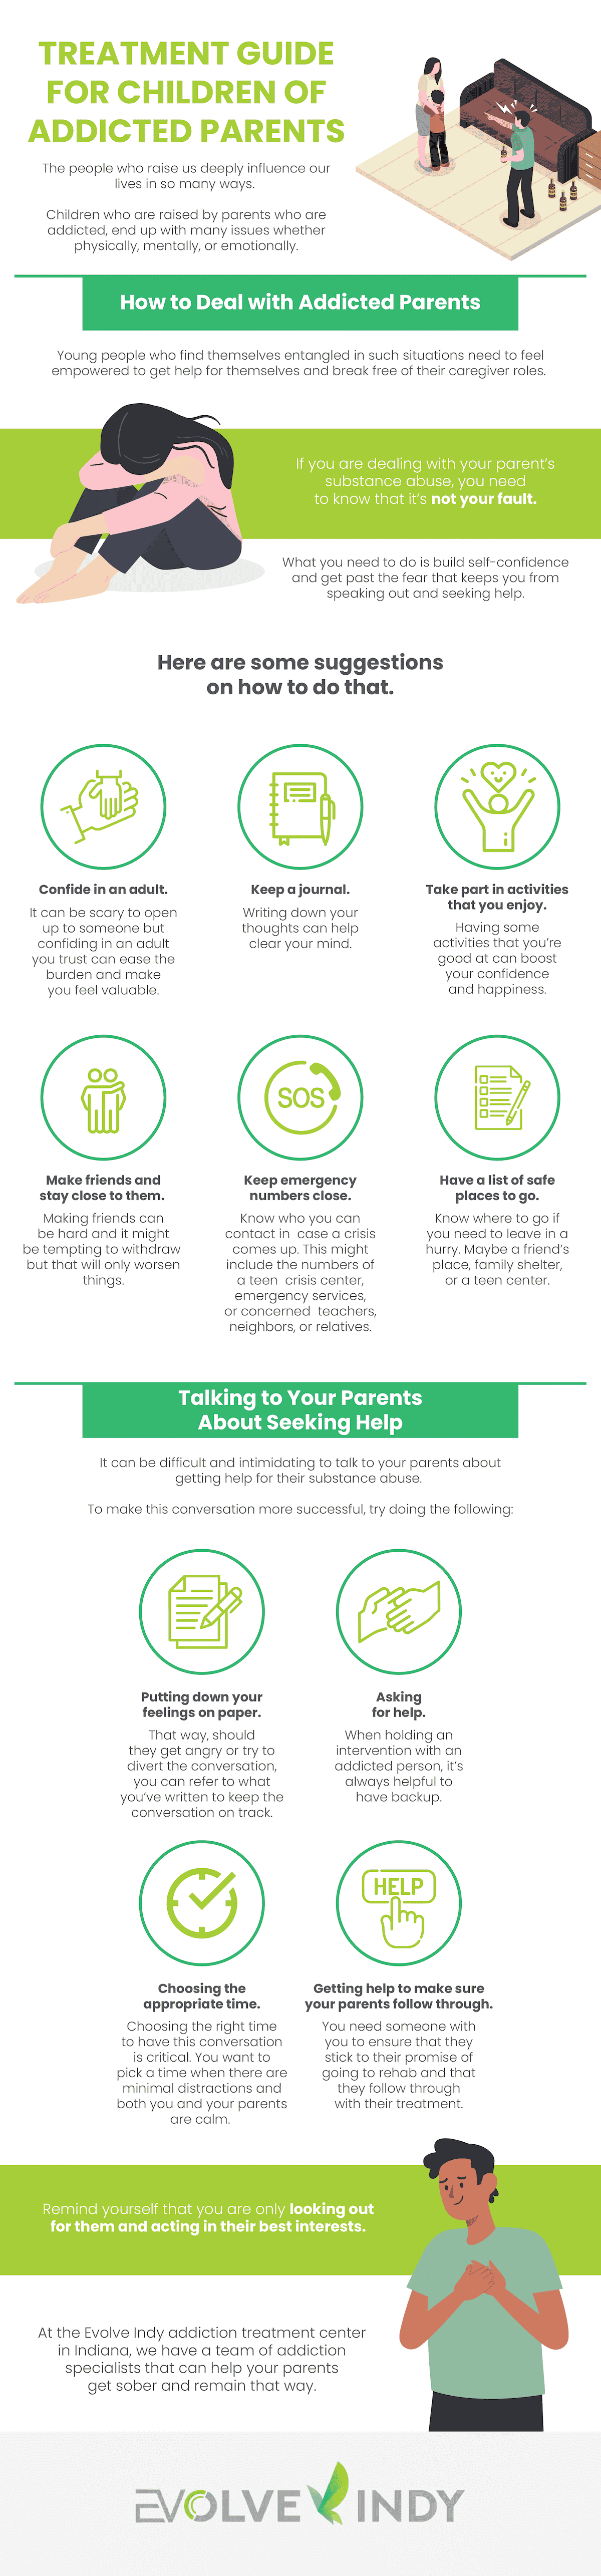 Treatment Guide for Children of Addicted Parents